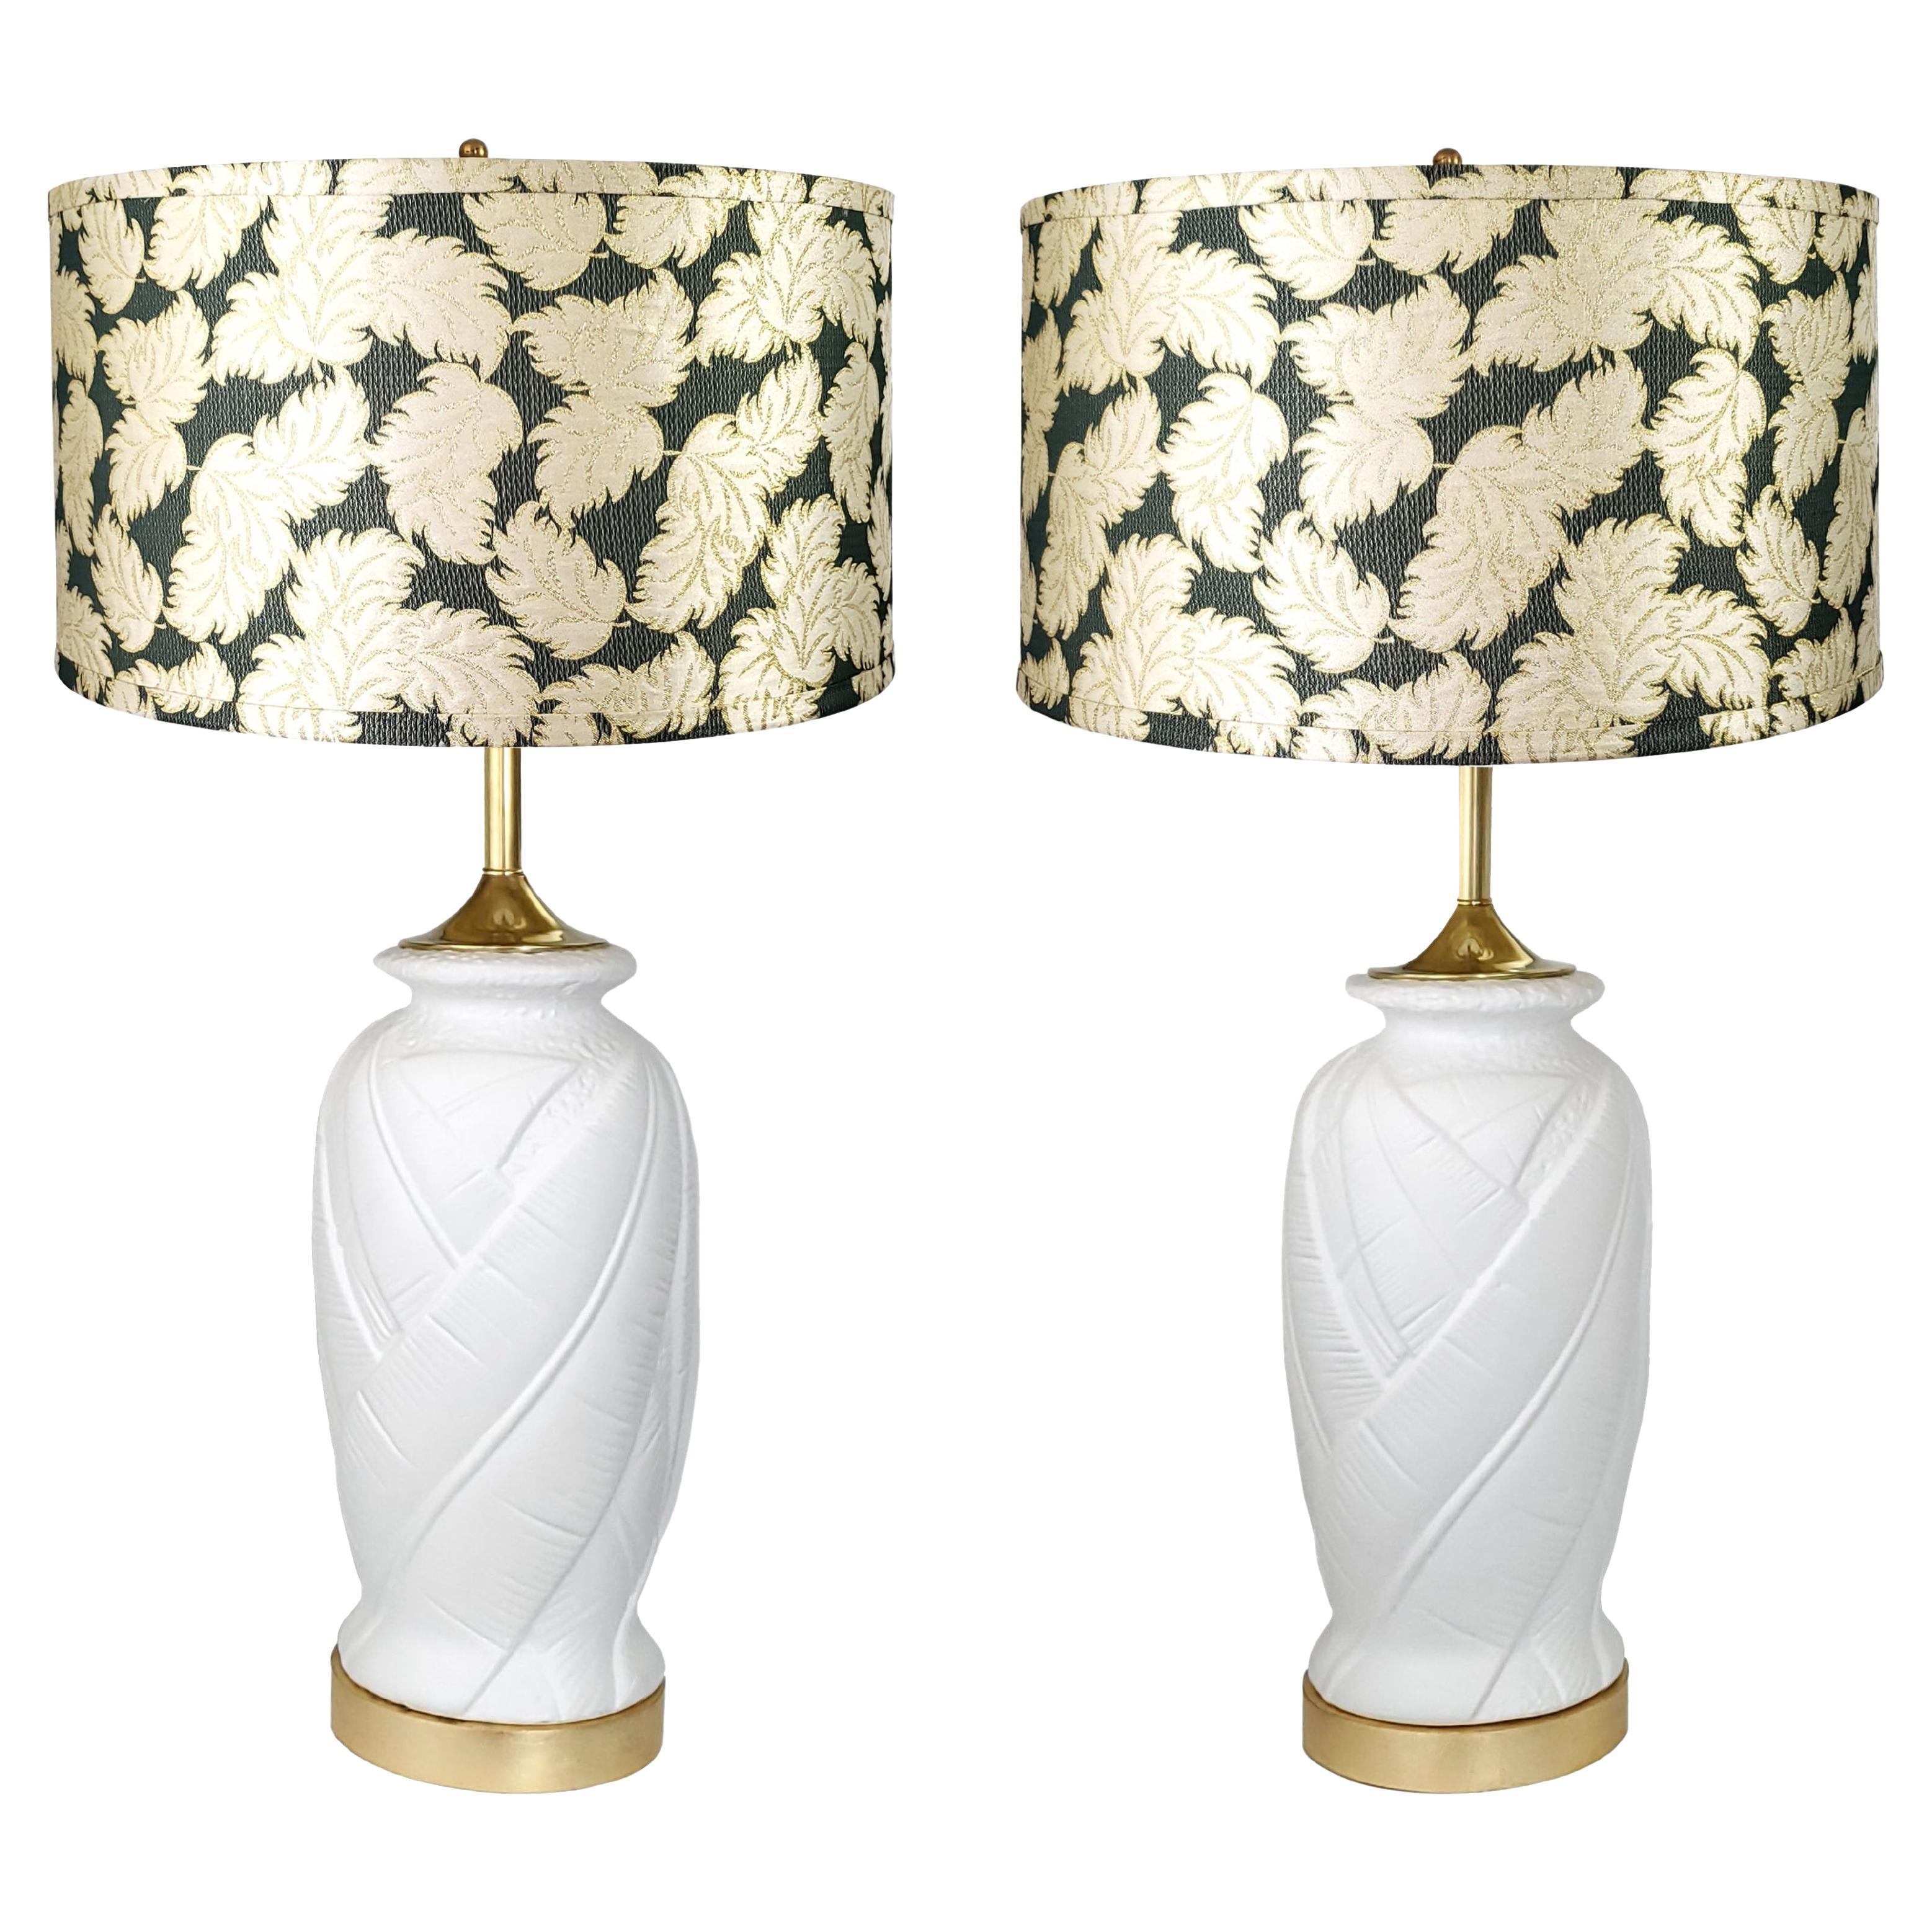 Pair Vintage White Plaster Palm Leaf Table Lamps with Vintage Drum Lamp Shades